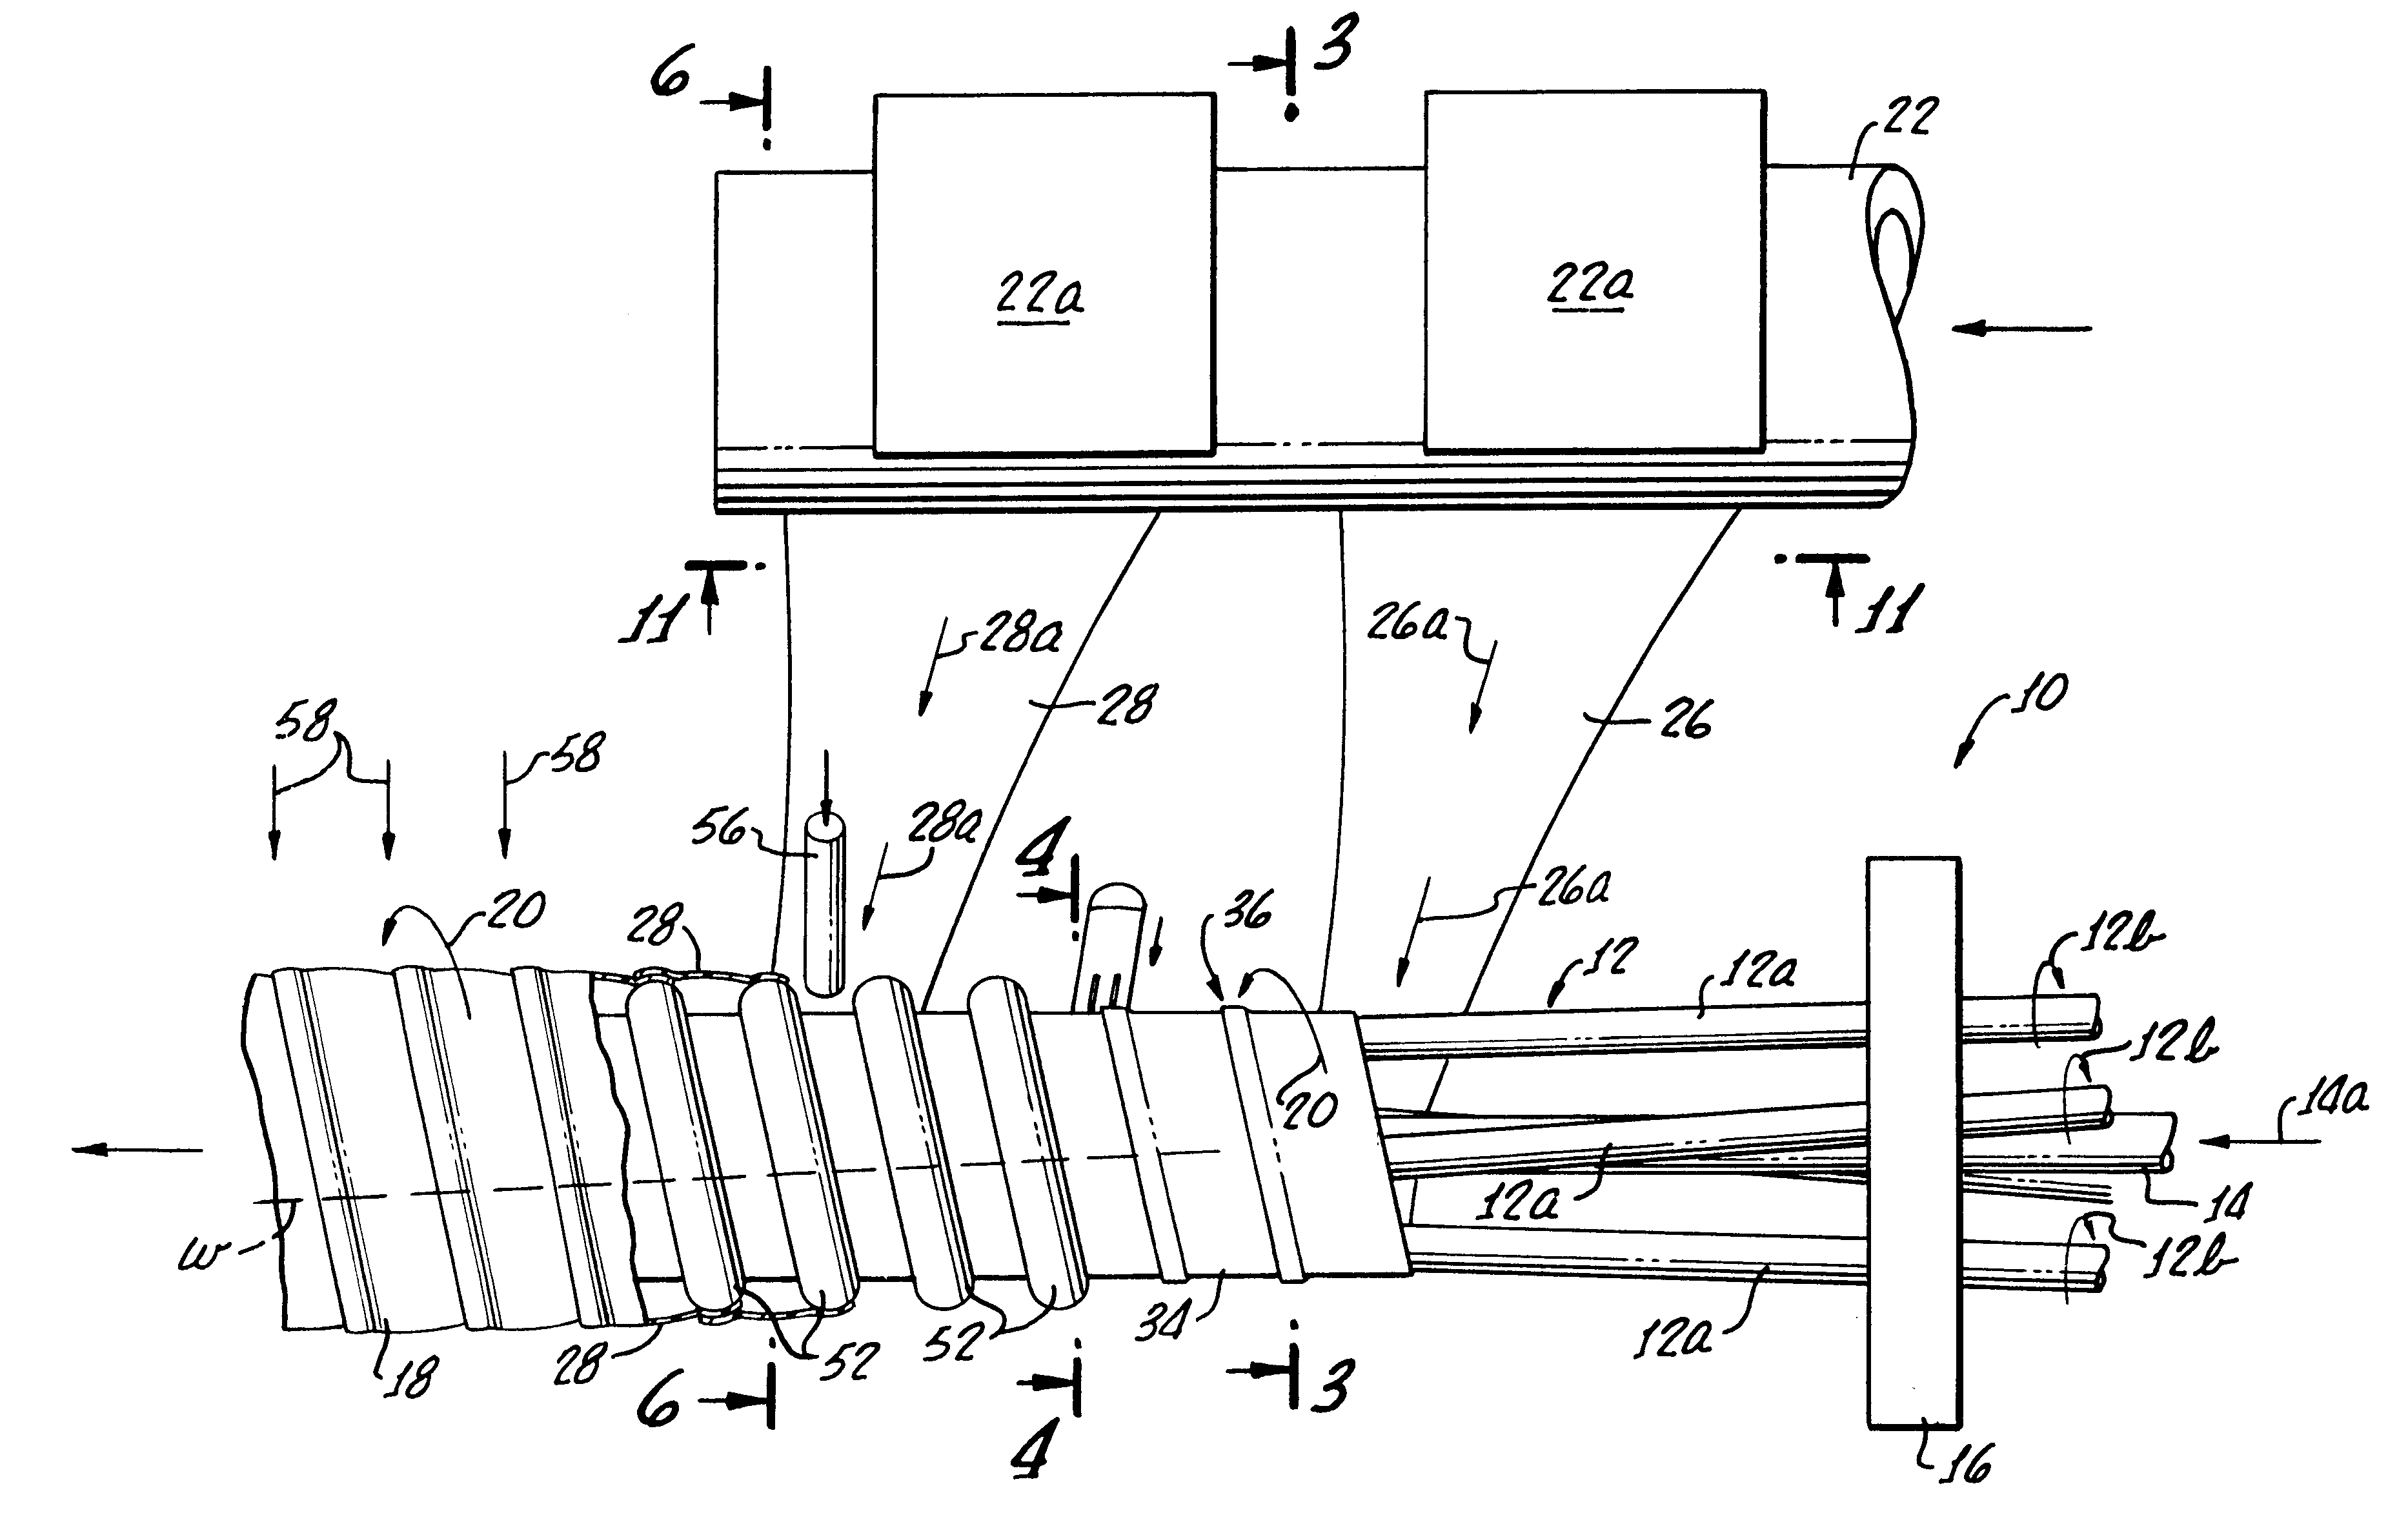 Method of making a double-walled flexible tubing product with helical support bead and heating conductor